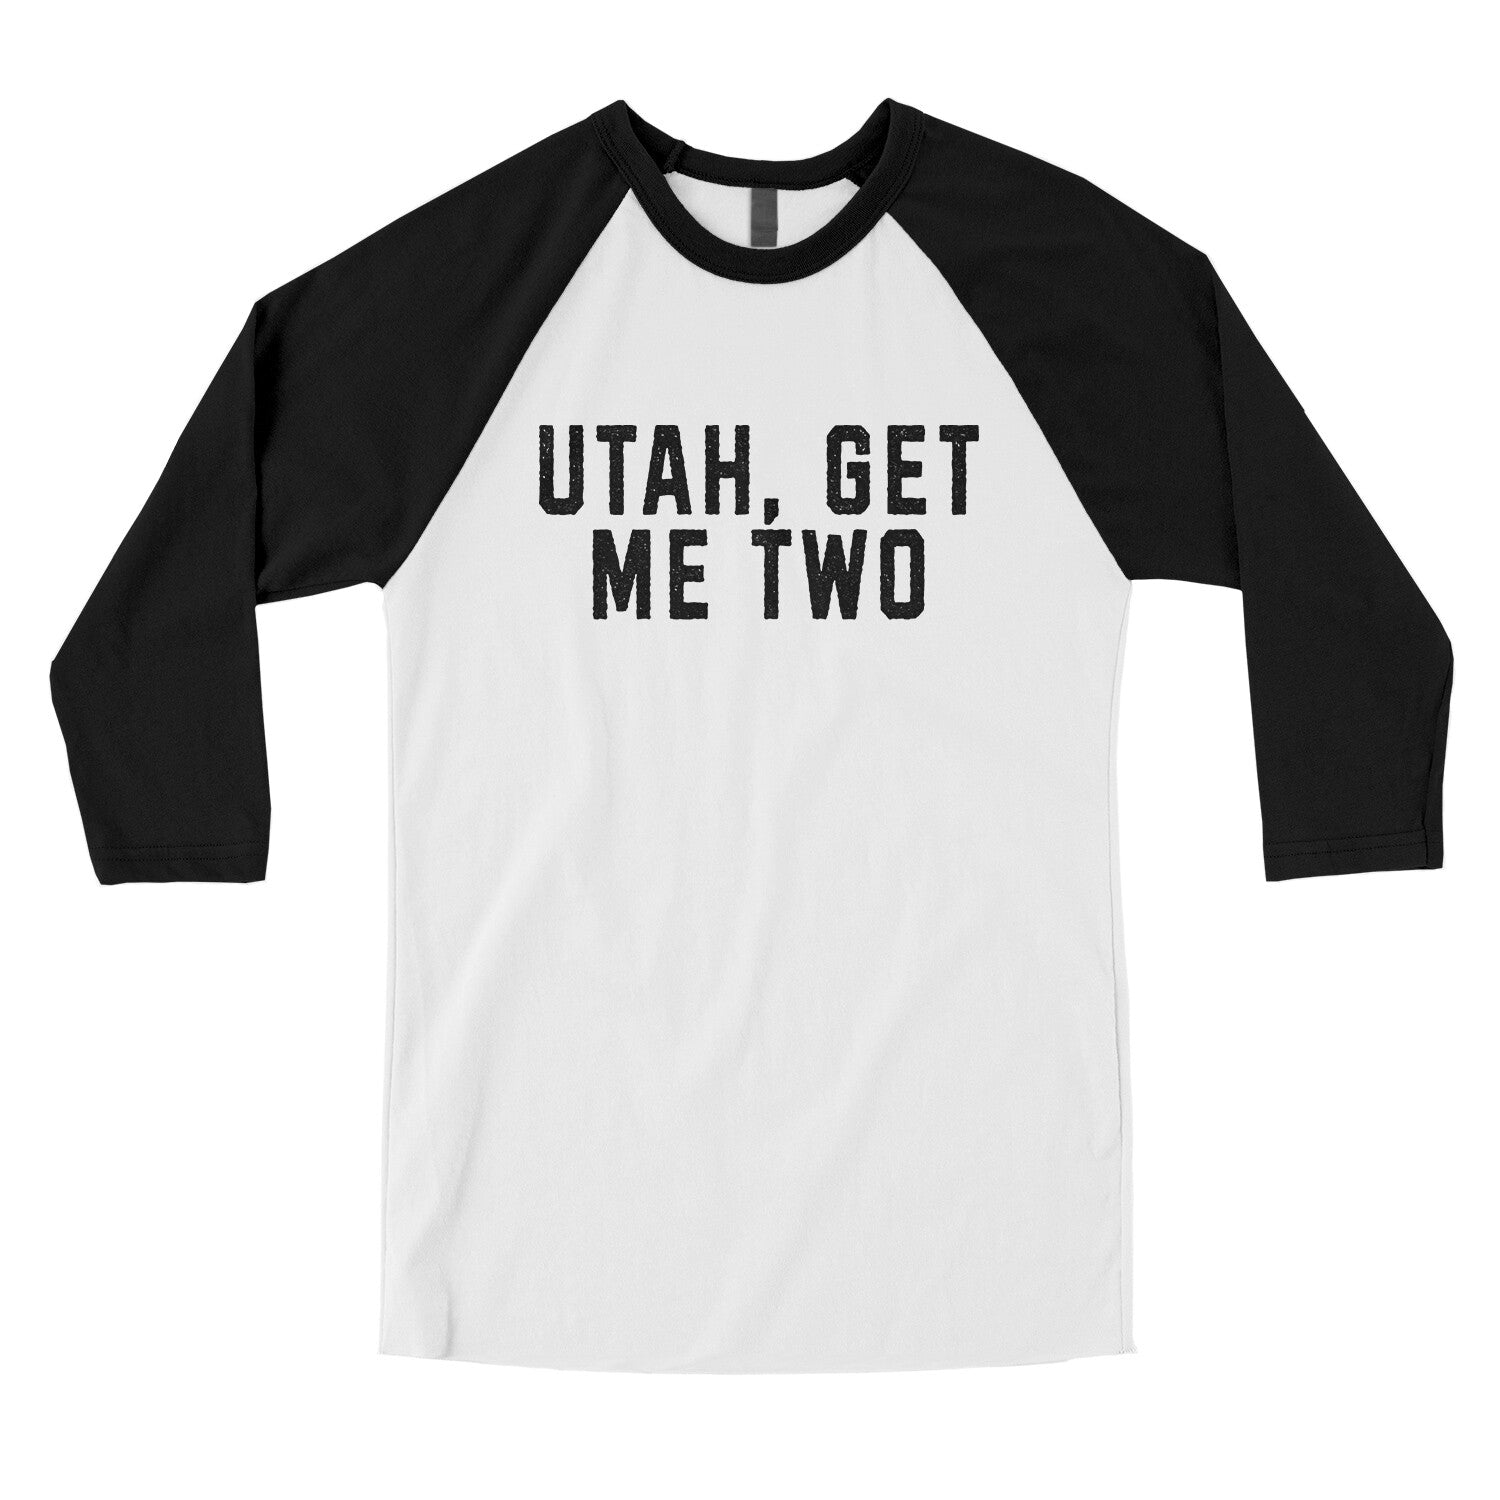 Utah Get me Two in White with Black Color